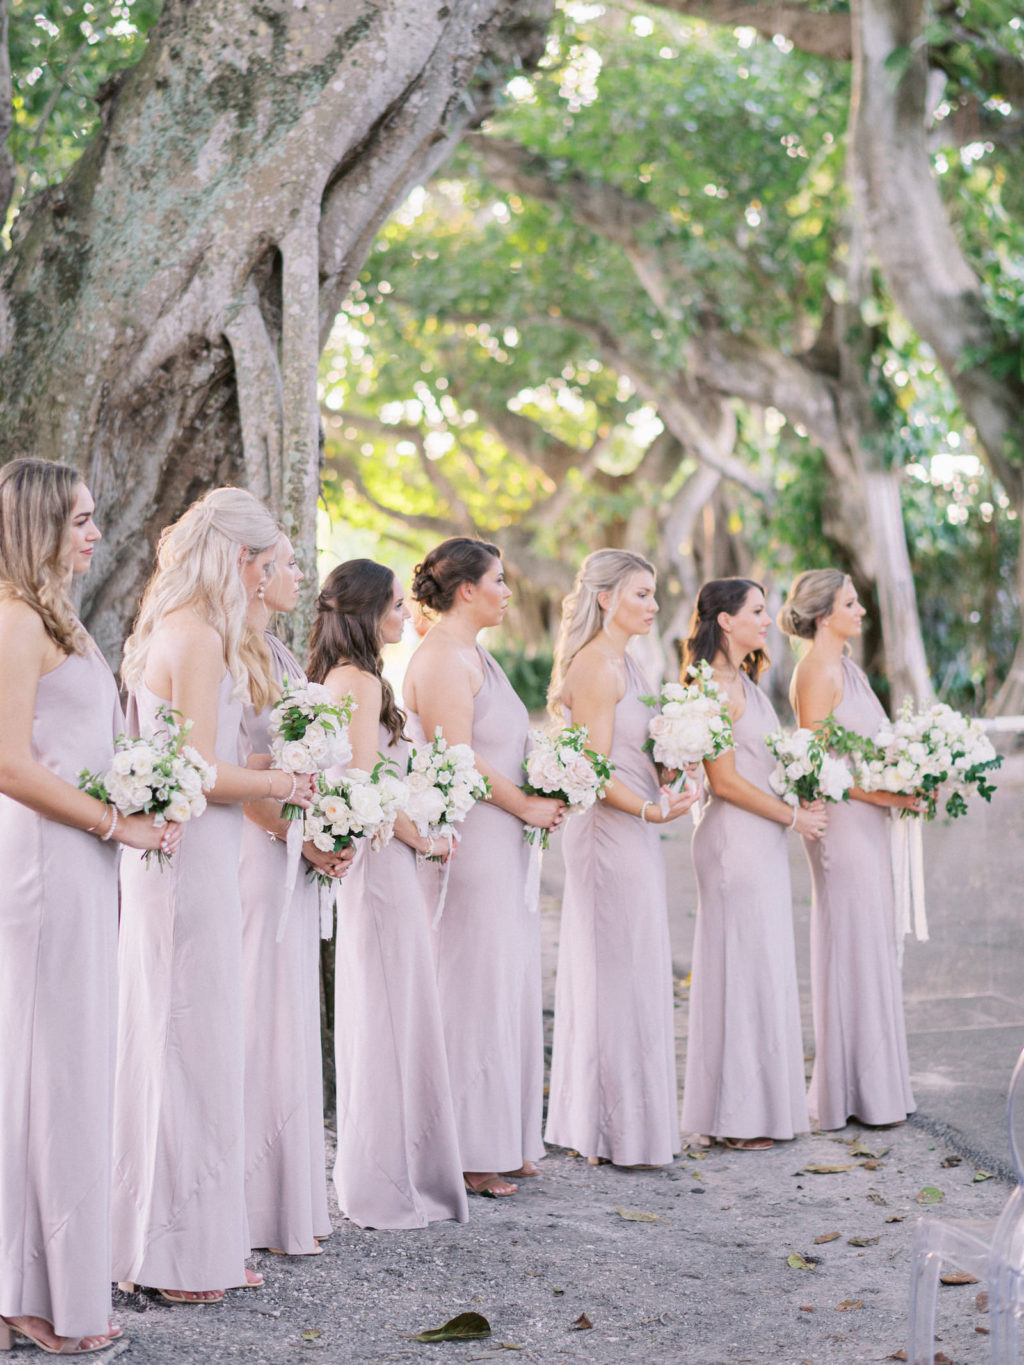 Classic Elegant Florida Bridesmaids Wearing Matching One Shoulder Gray Dresses Holding White Floral Bouquets